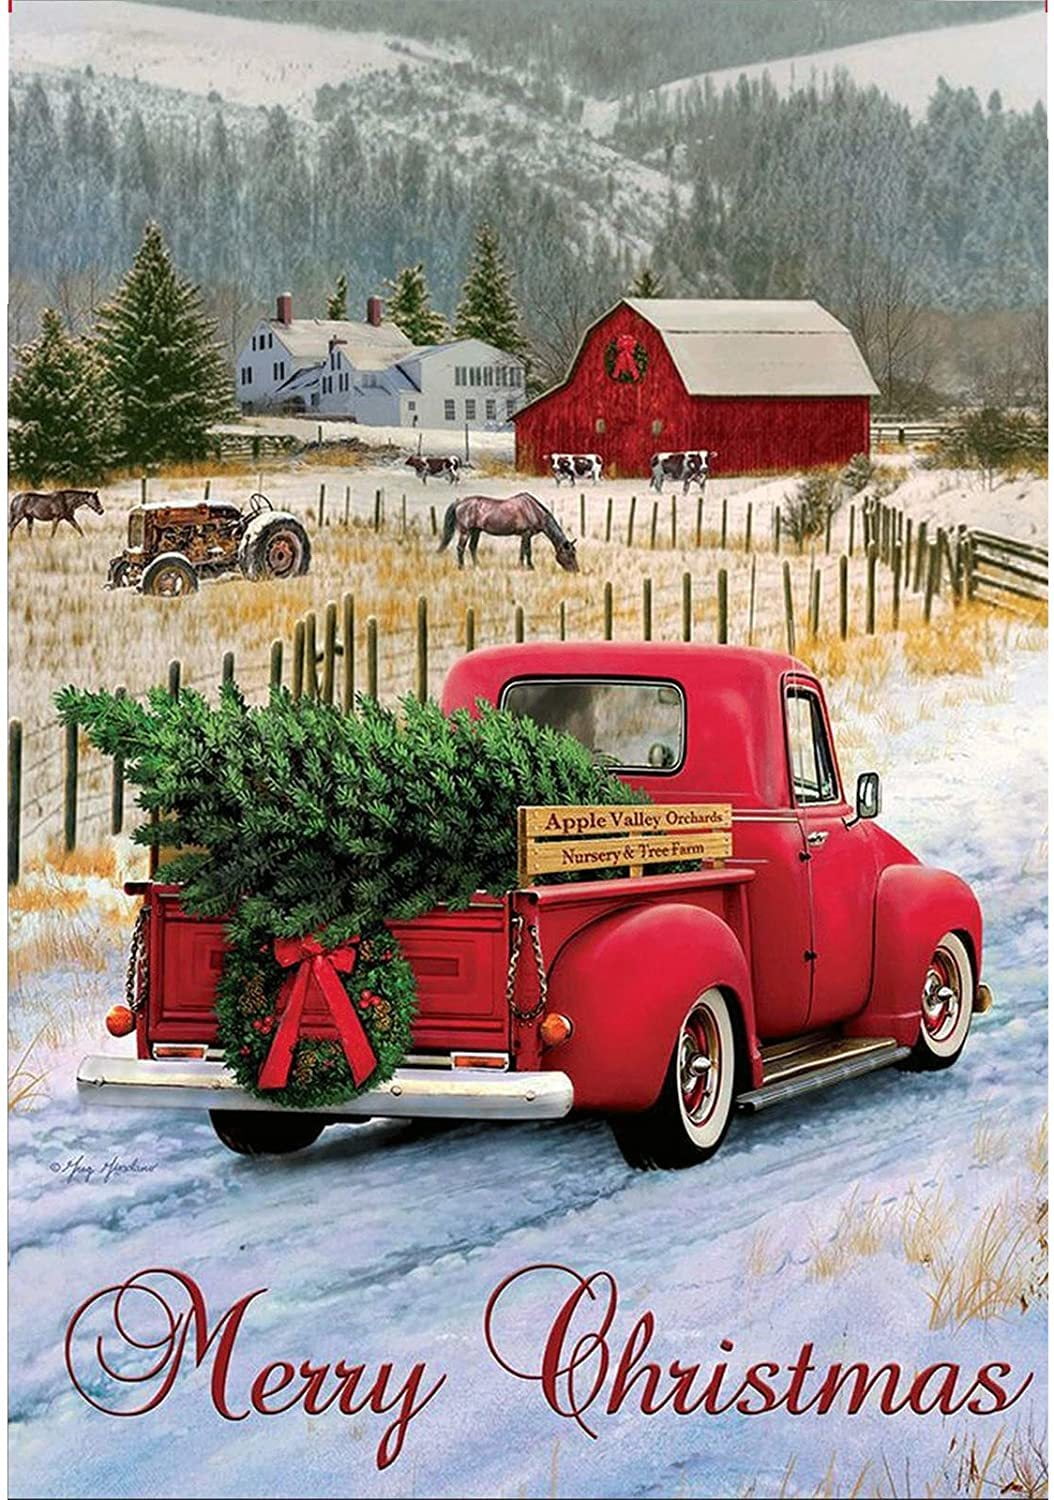 Goaus Merry Christmas Garden Flag,Red Truck Deliver Xmas Tree in Rustic Snowing Winter,Double Sided Burlap Decorative House Flags for Home Lawn Yard Indoor Outdoor Decor,12 x 18 Inch 